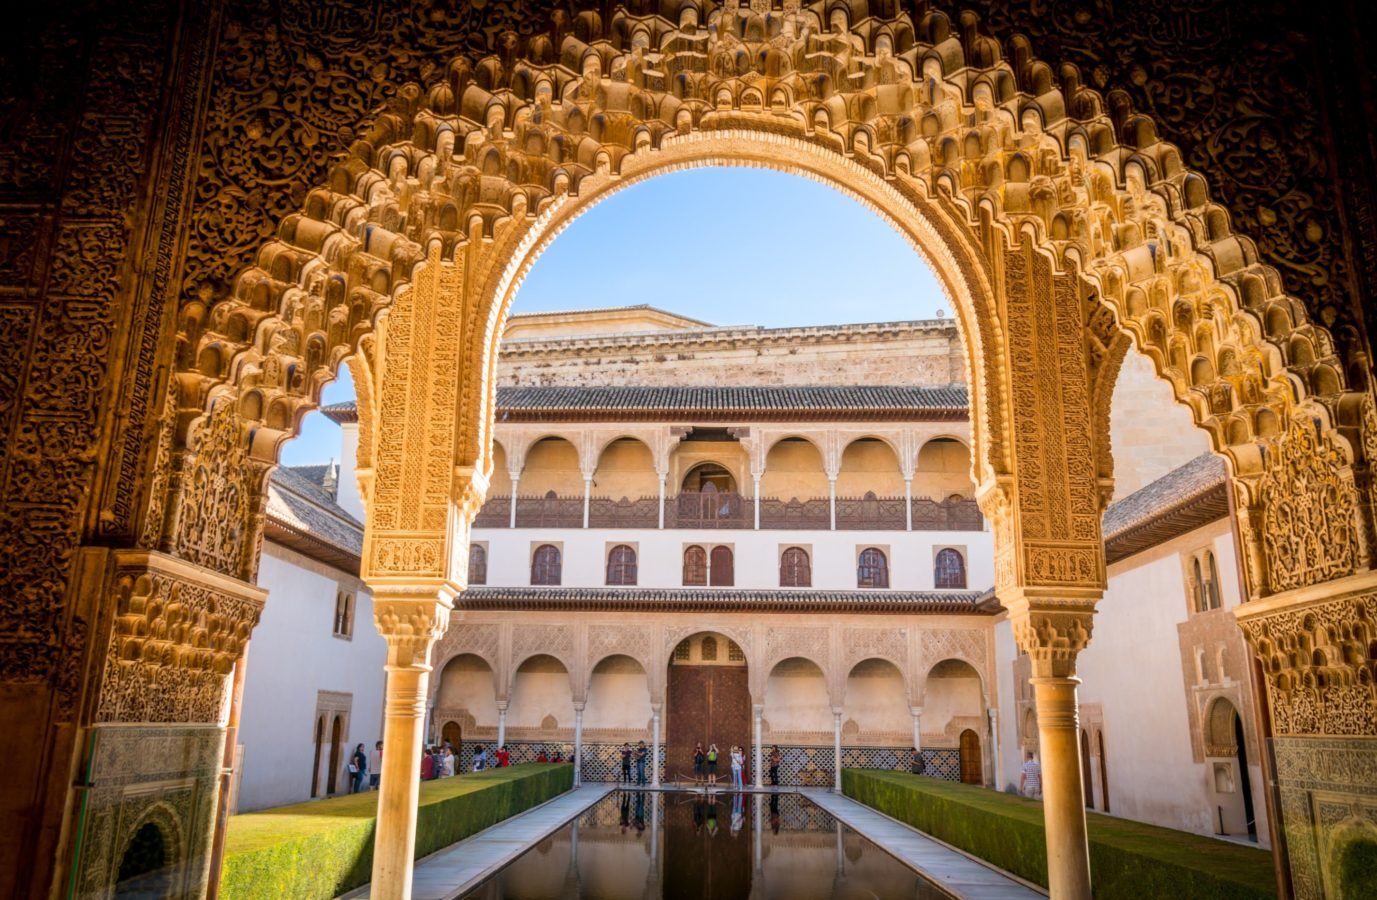 Southern Spain's Alhambra Palace is now open to visitors